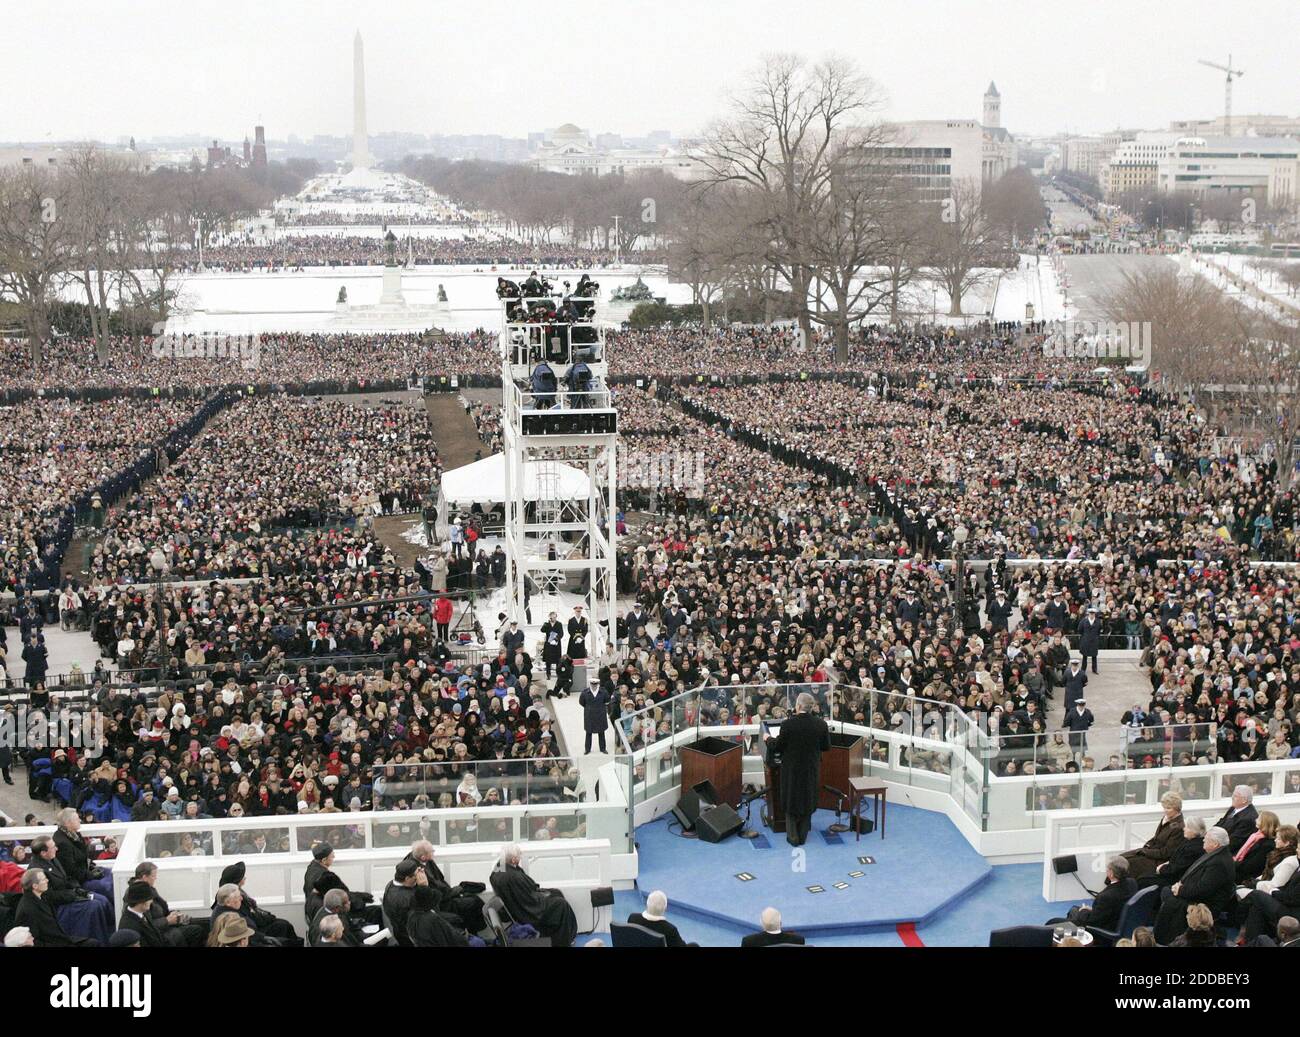 NO FILM, NO VIDEO, NO TV, NO DOCUMENTARY - U.S. President George W. Bush gives his Inauguration Day speech, as seen from the U.S. Capitol building during the presidential Inauguration ceremony. Washington, DC, USA, on January 20, 2005. Photo by Chuck Kennedy/US News Story Slugged/KRT/ABACA. Stock Photo